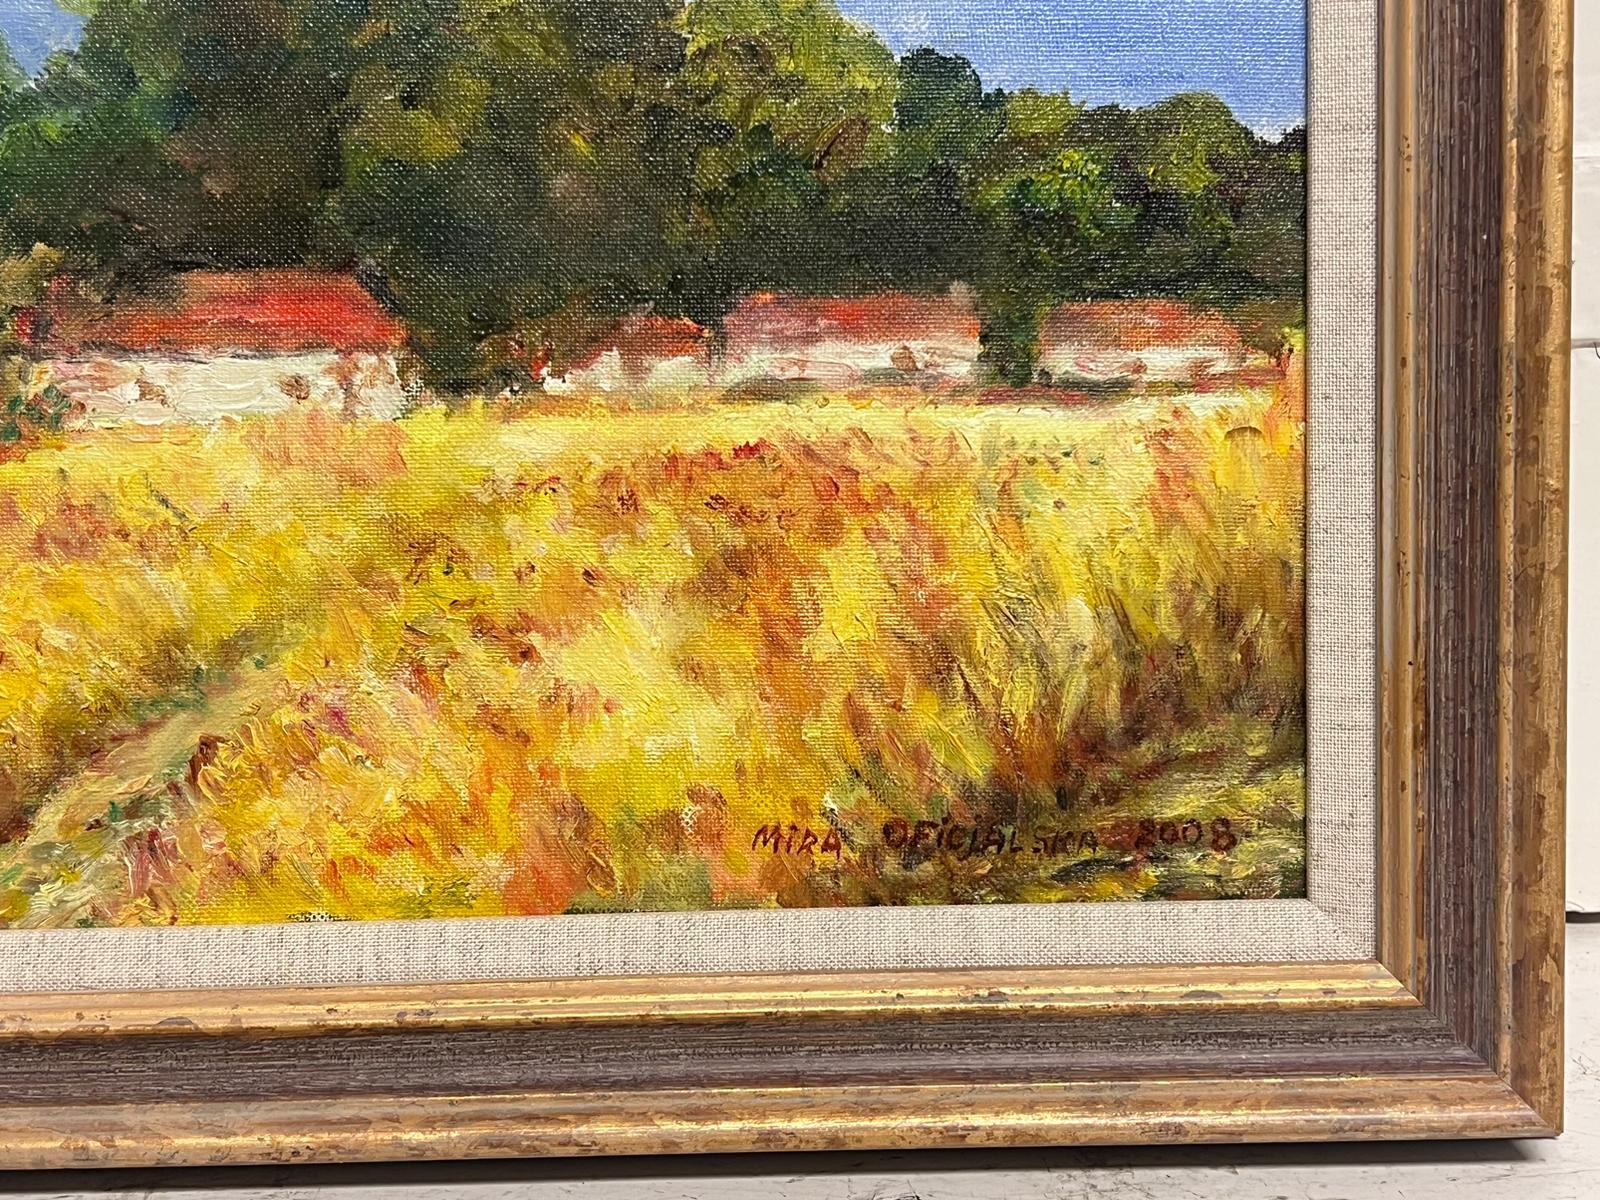 Cottages in Golden Harvest Field Signed & Dated 2008 Impressionist Oil Painting For Sale 3